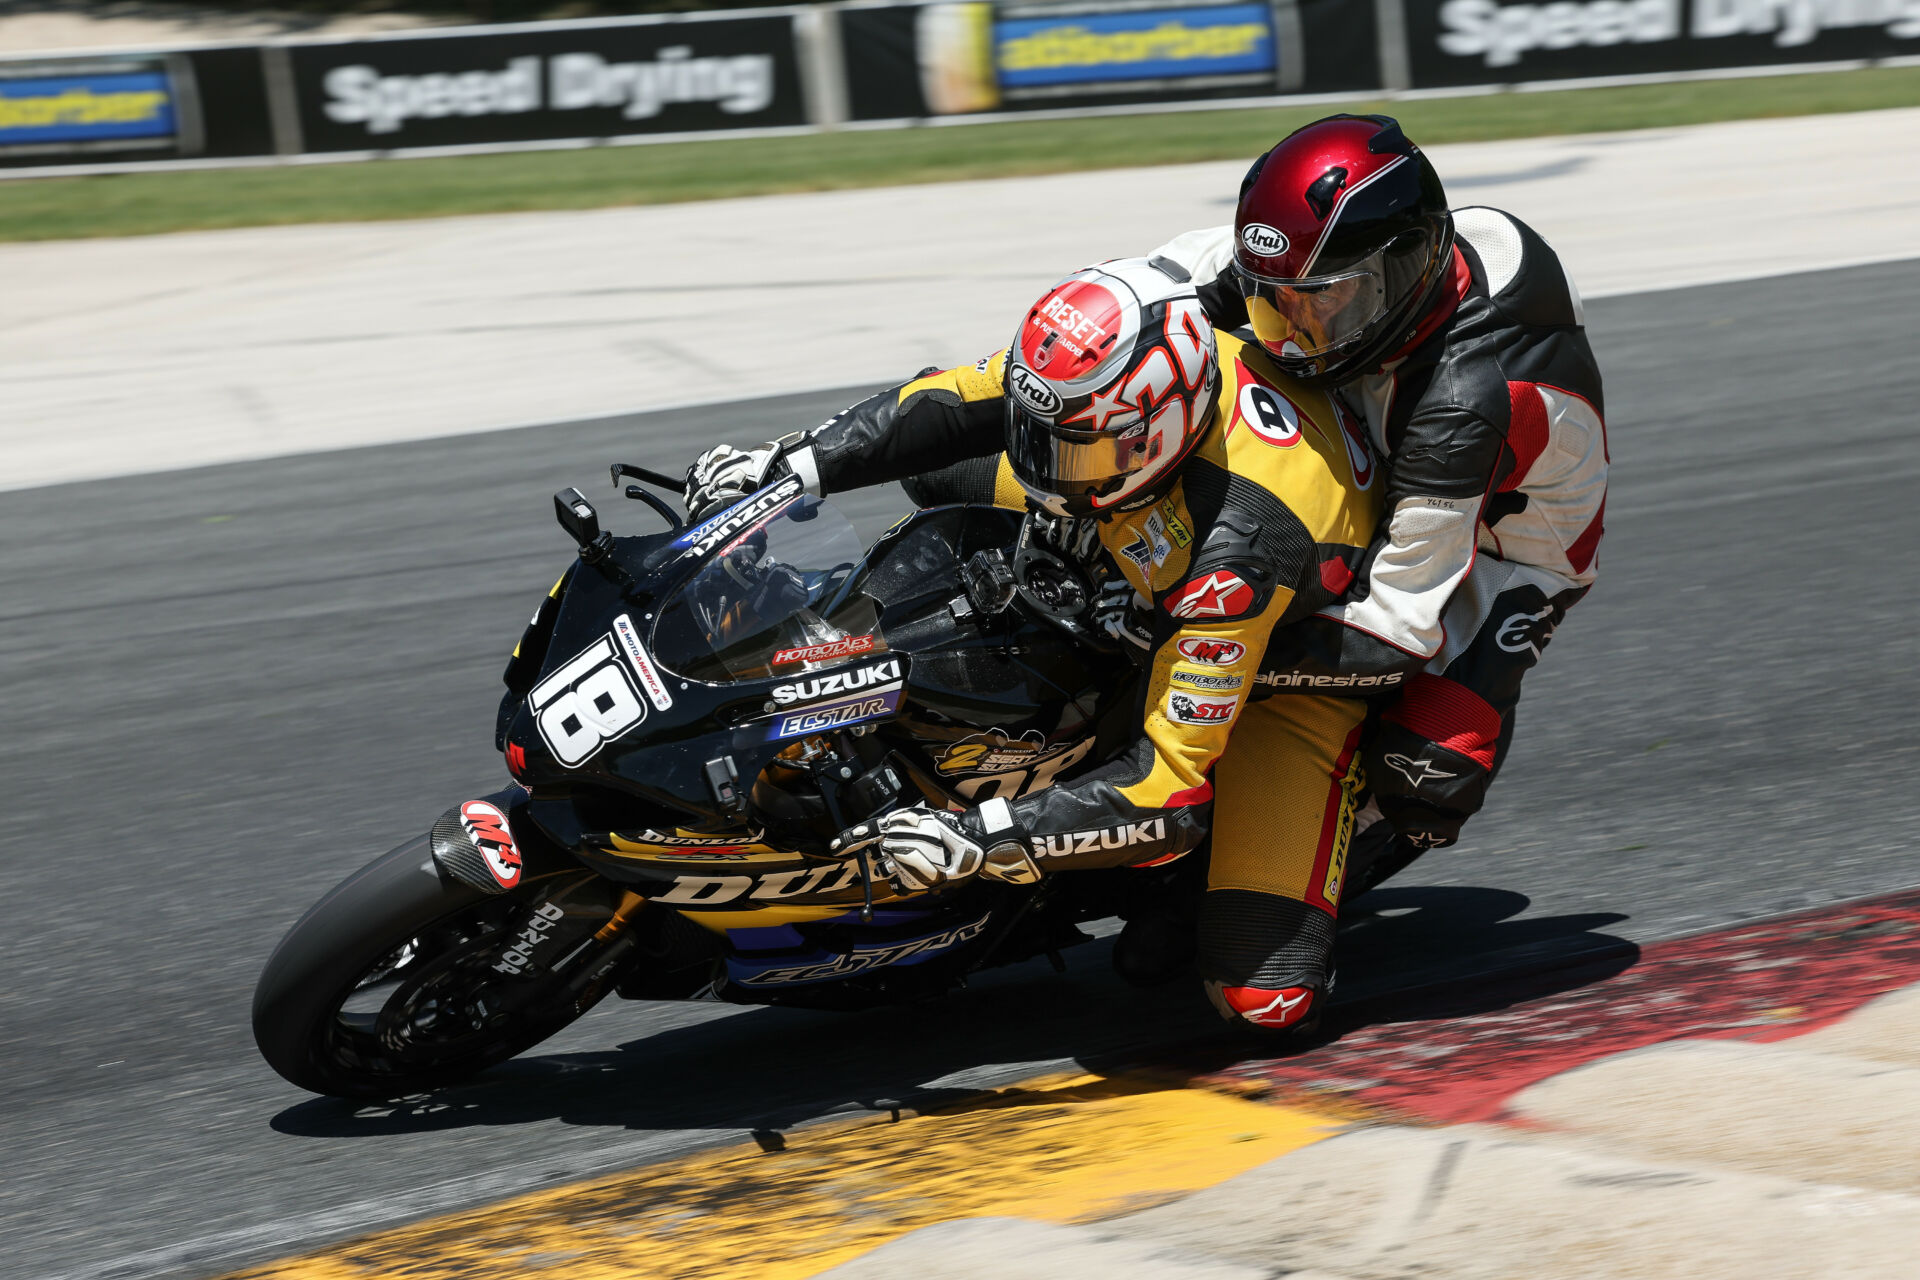 Chris Ulrich pilots the Dunlop ECSTAR Suzuki Two-Seat Superbike at Road America in June 2022. Photo by Brian J. Nelson, courtesy Team Hammer.